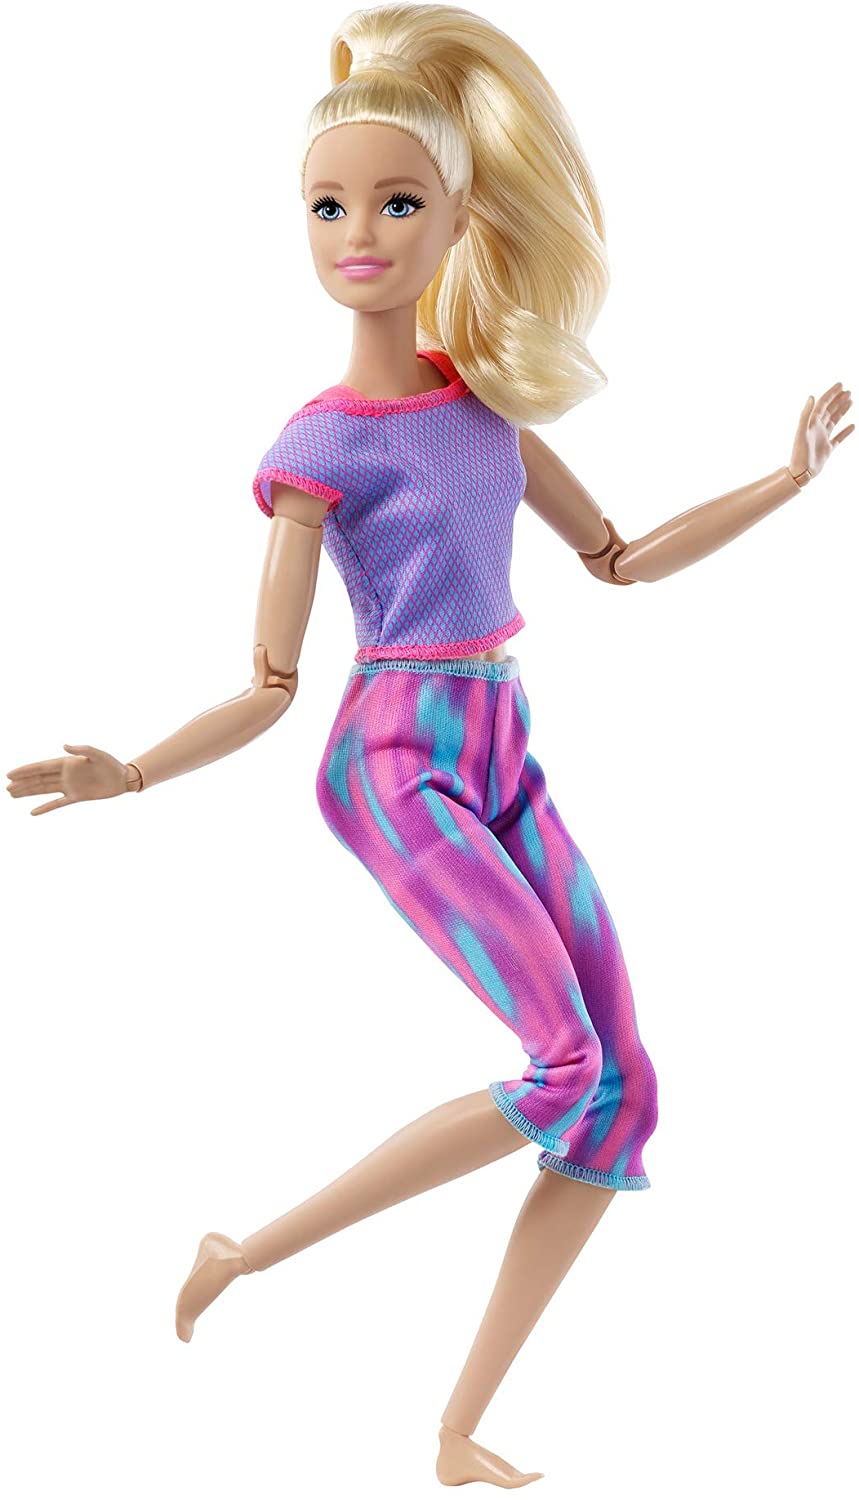 Barbie Made to Move Doll Blonde